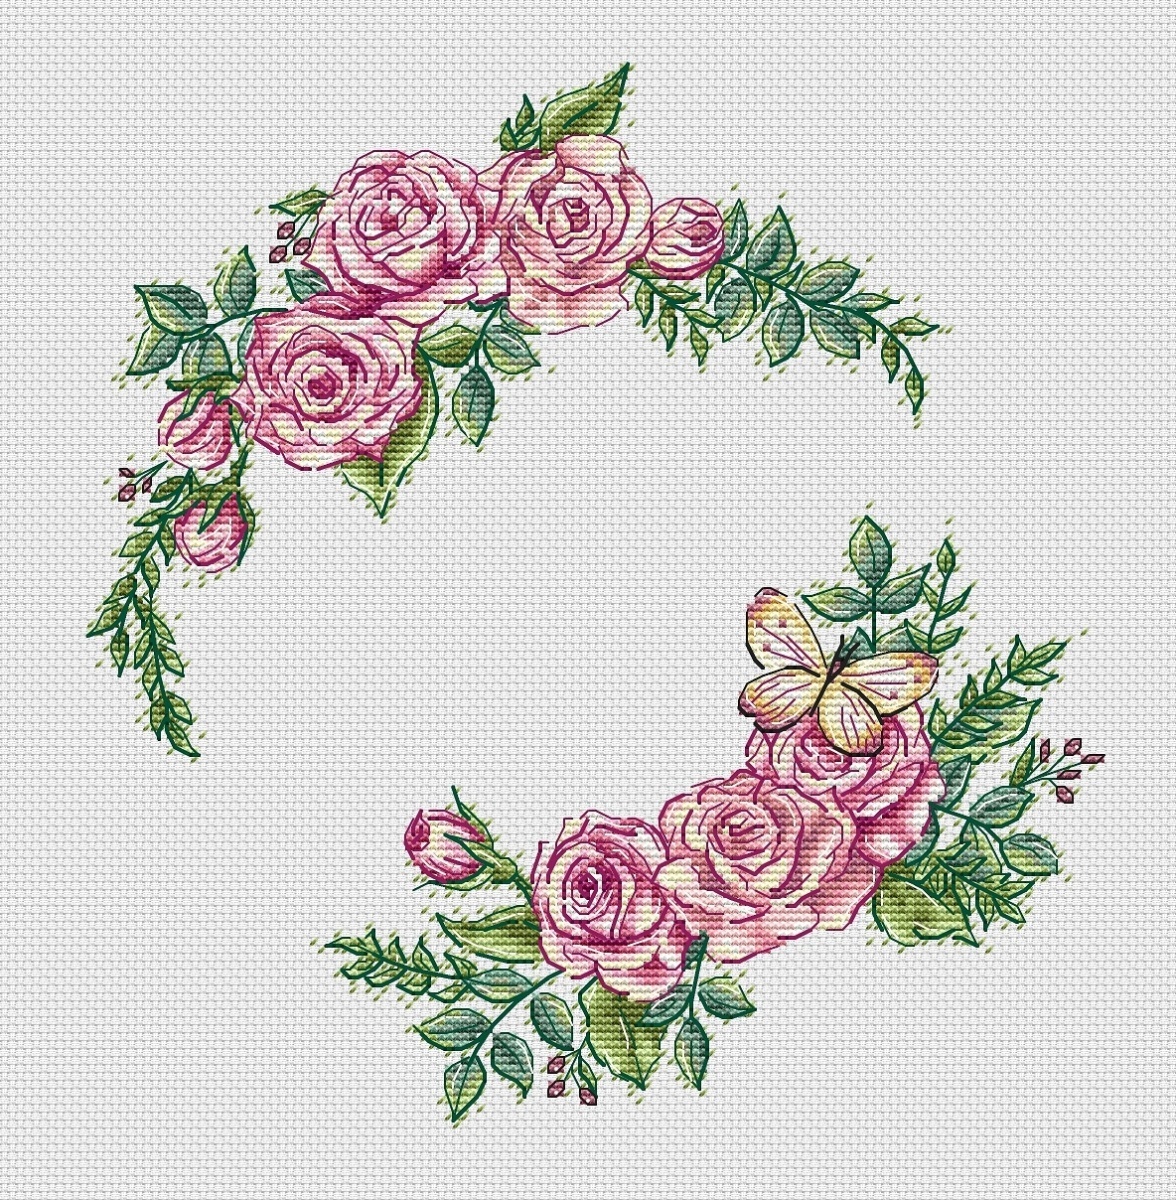 A Delicate Wreath of Roses Cross Stitch Pattern фото 1